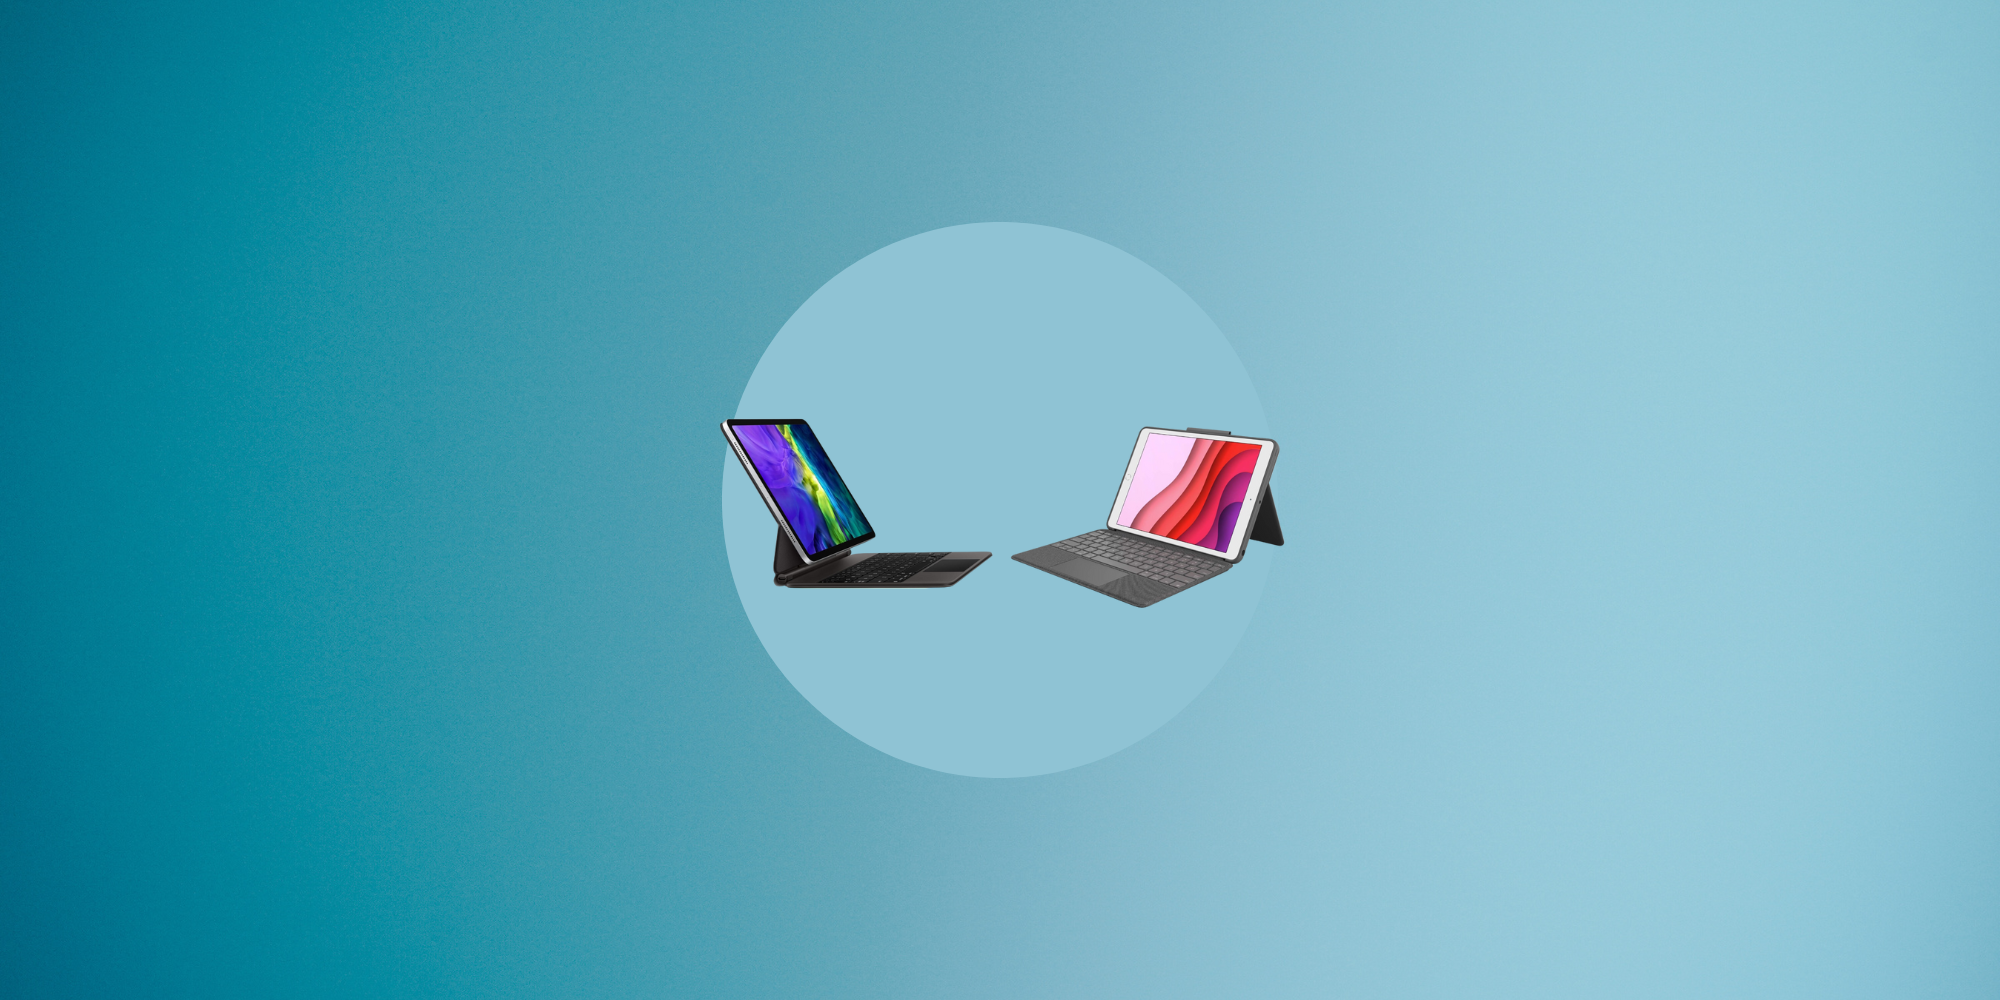 Two iPad keyboards featured against a cyan/turquoise background.